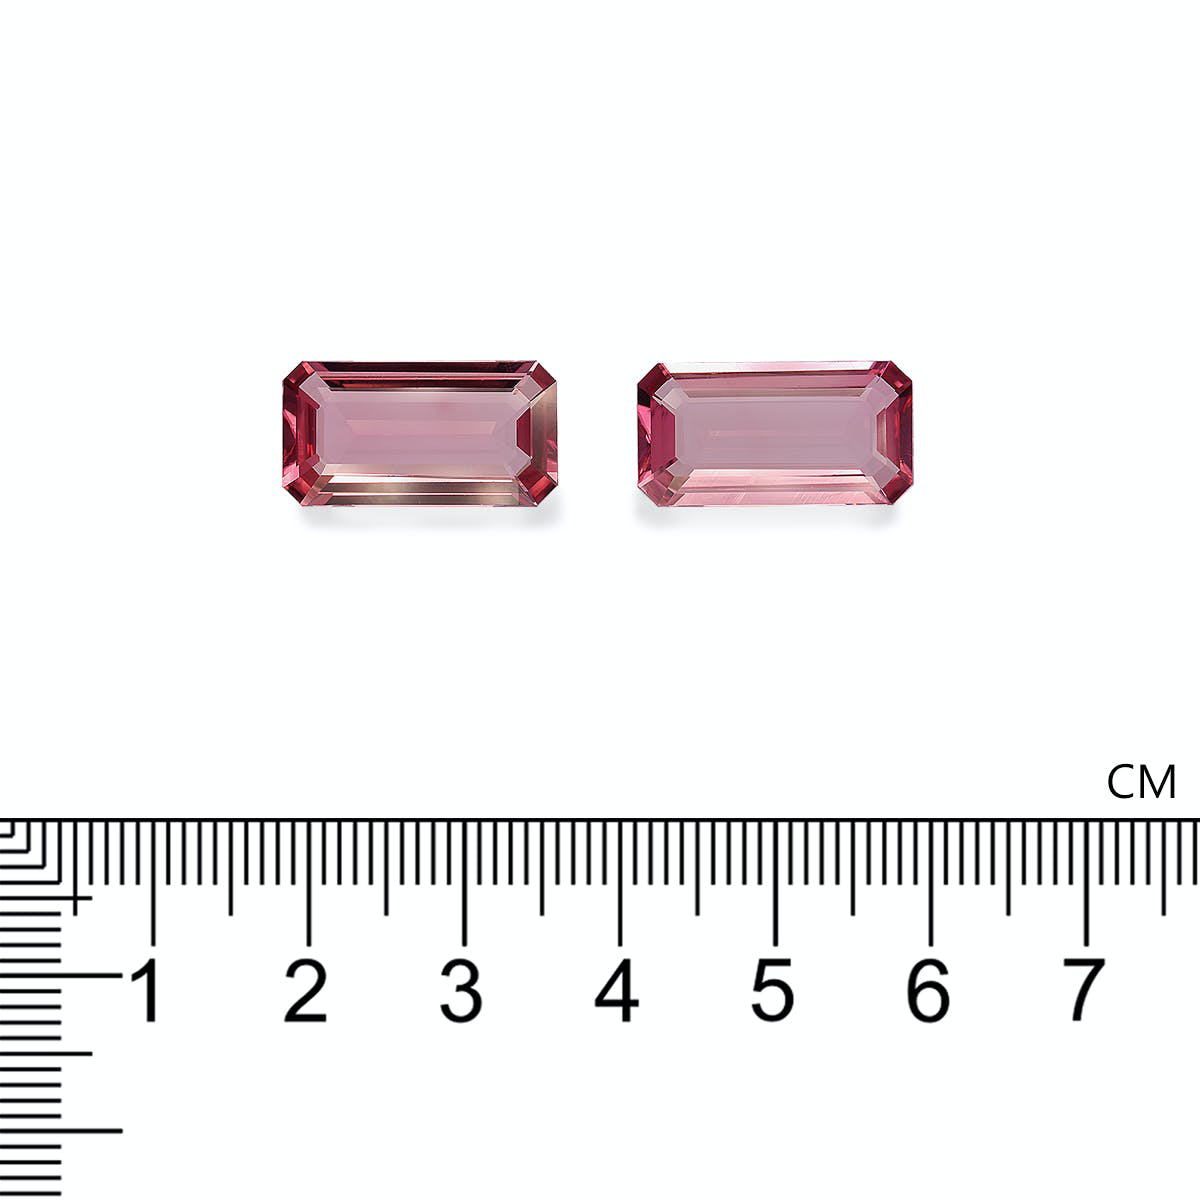 Picture of Coral Pink Tourmaline 15.30ct - Pair (PT1180)